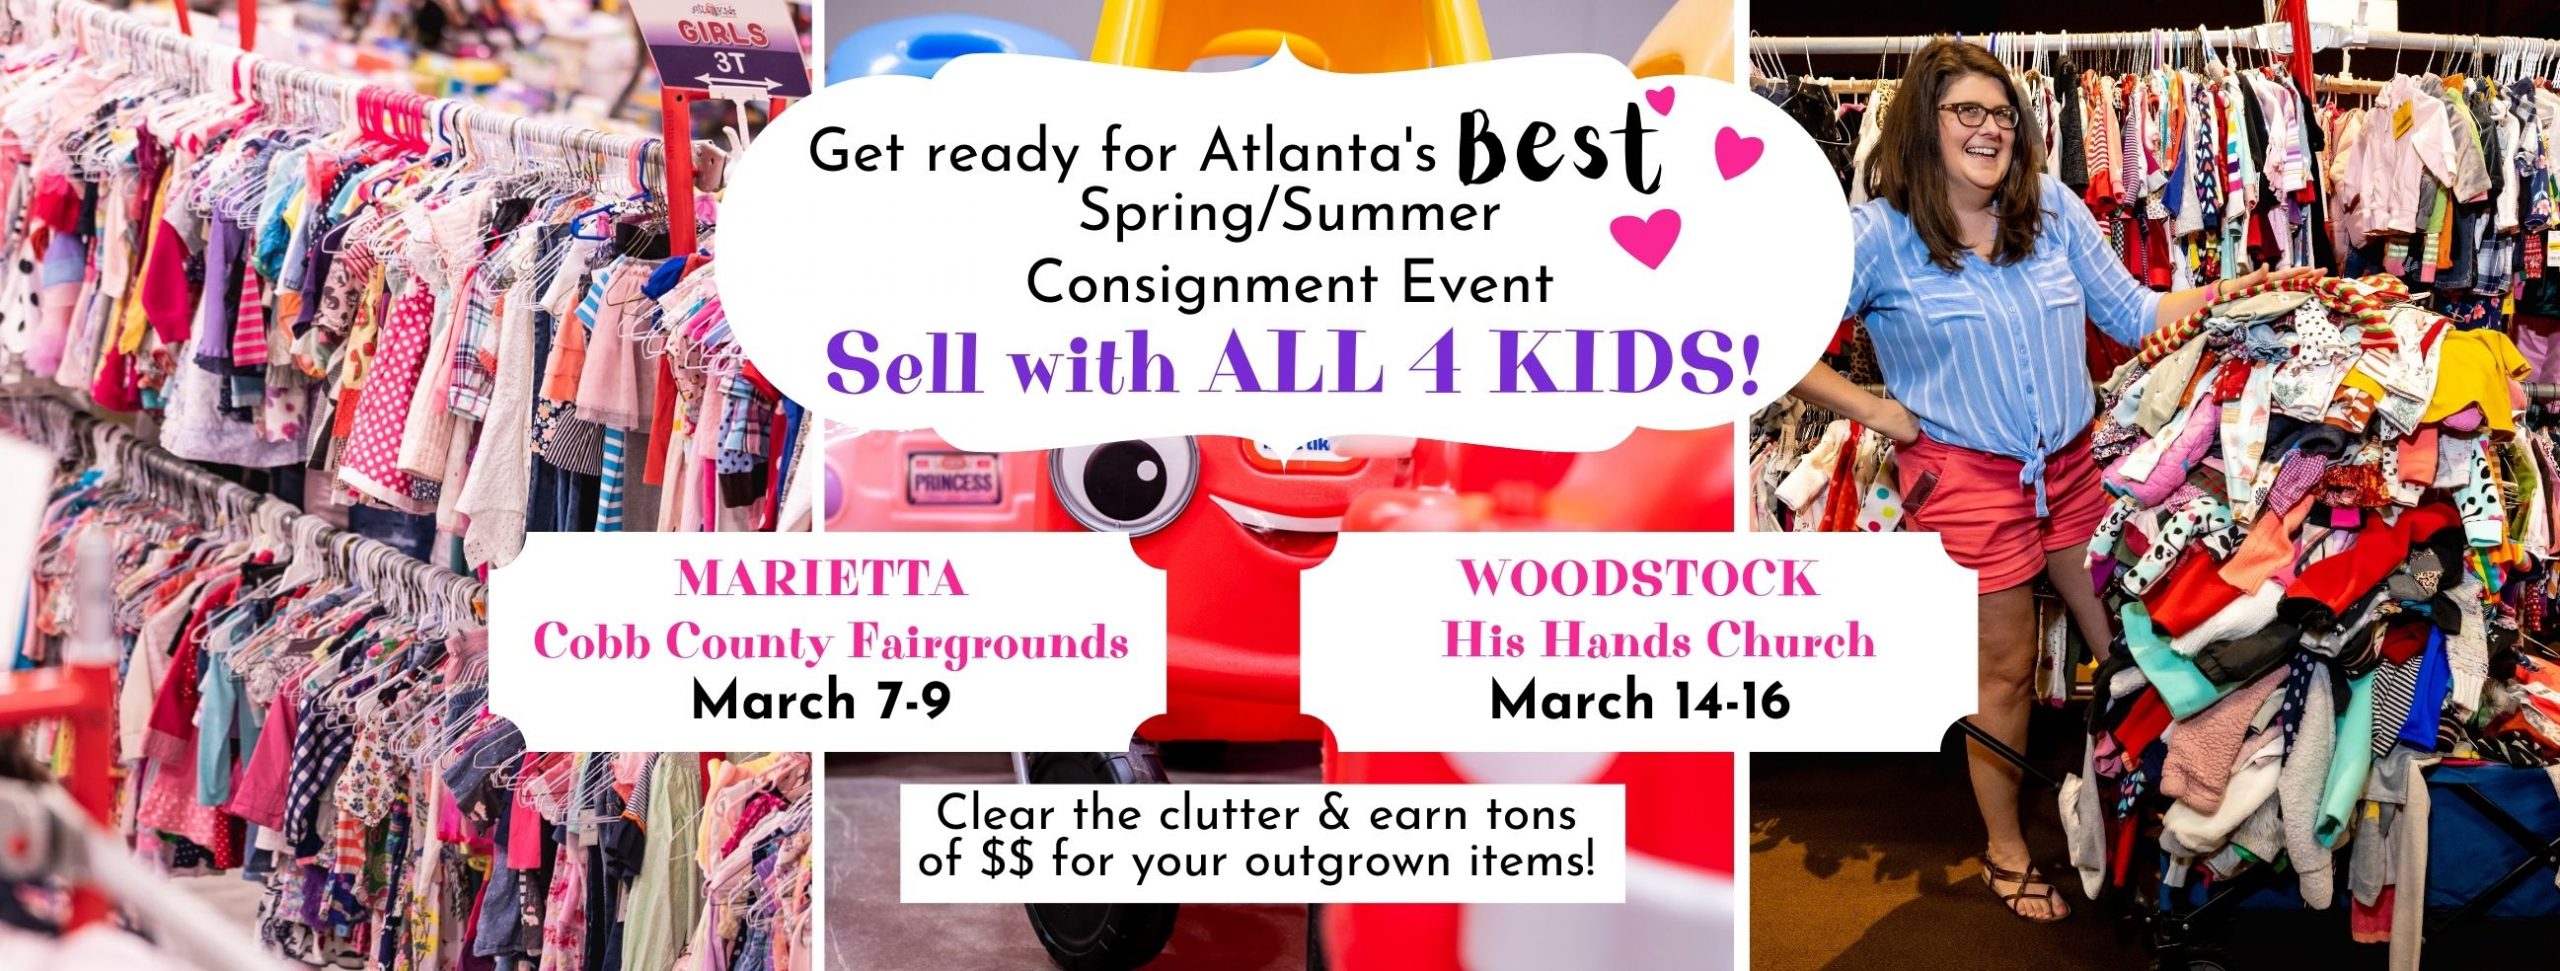 Sell - All 4 Kids Children's Consignment Sales